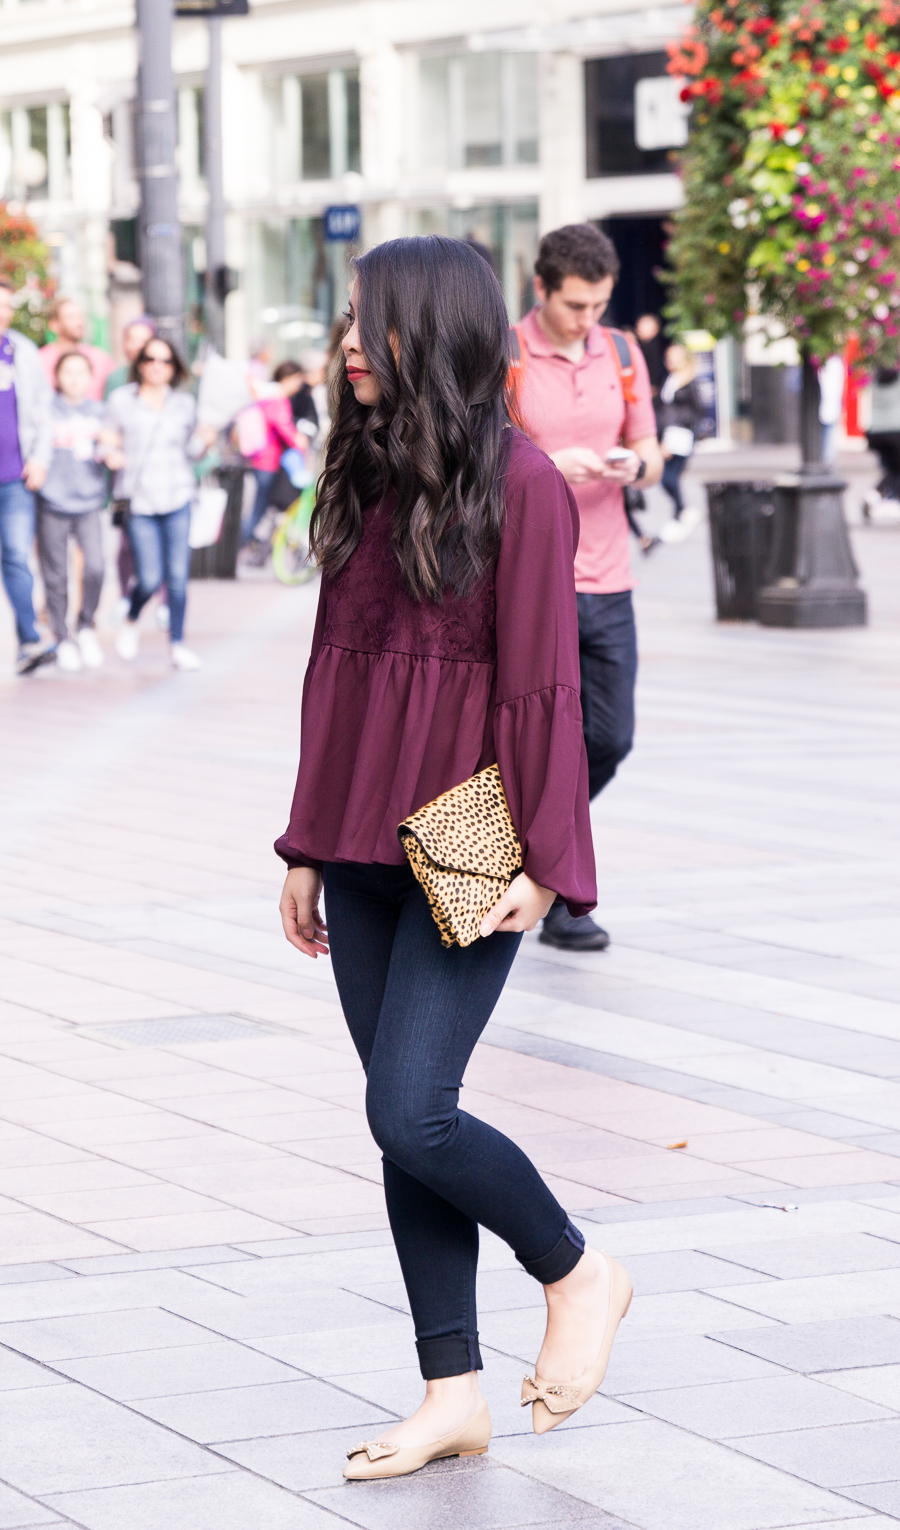 Burgundy top, bow shoes, casual style, Seattle fashion blogger